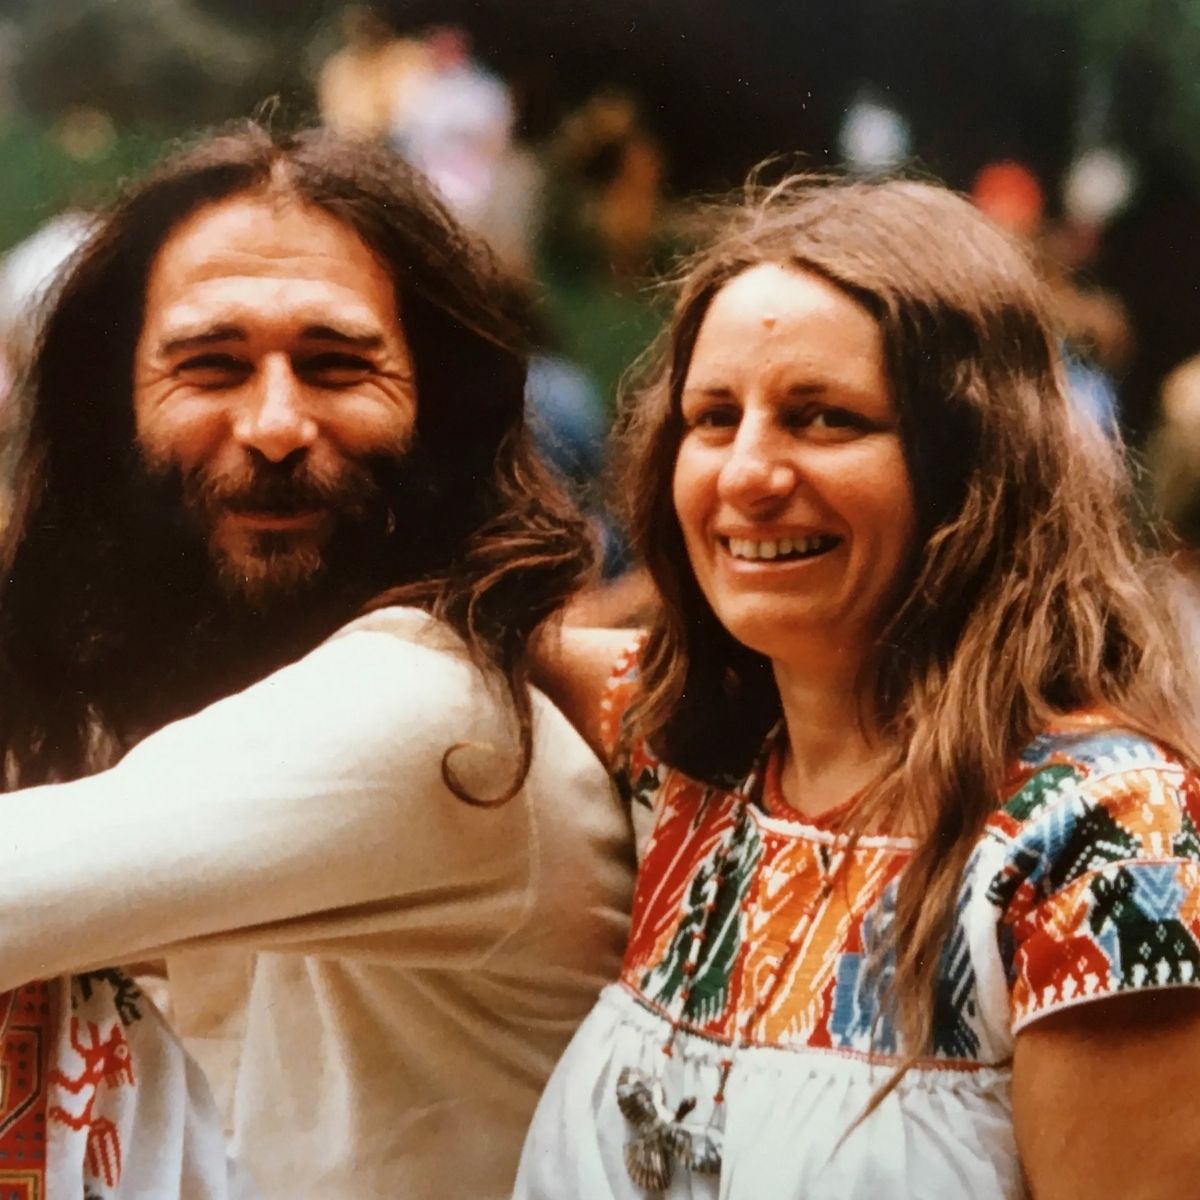 Shot from the festival "Summer of Love" ("The Summer Of Love")